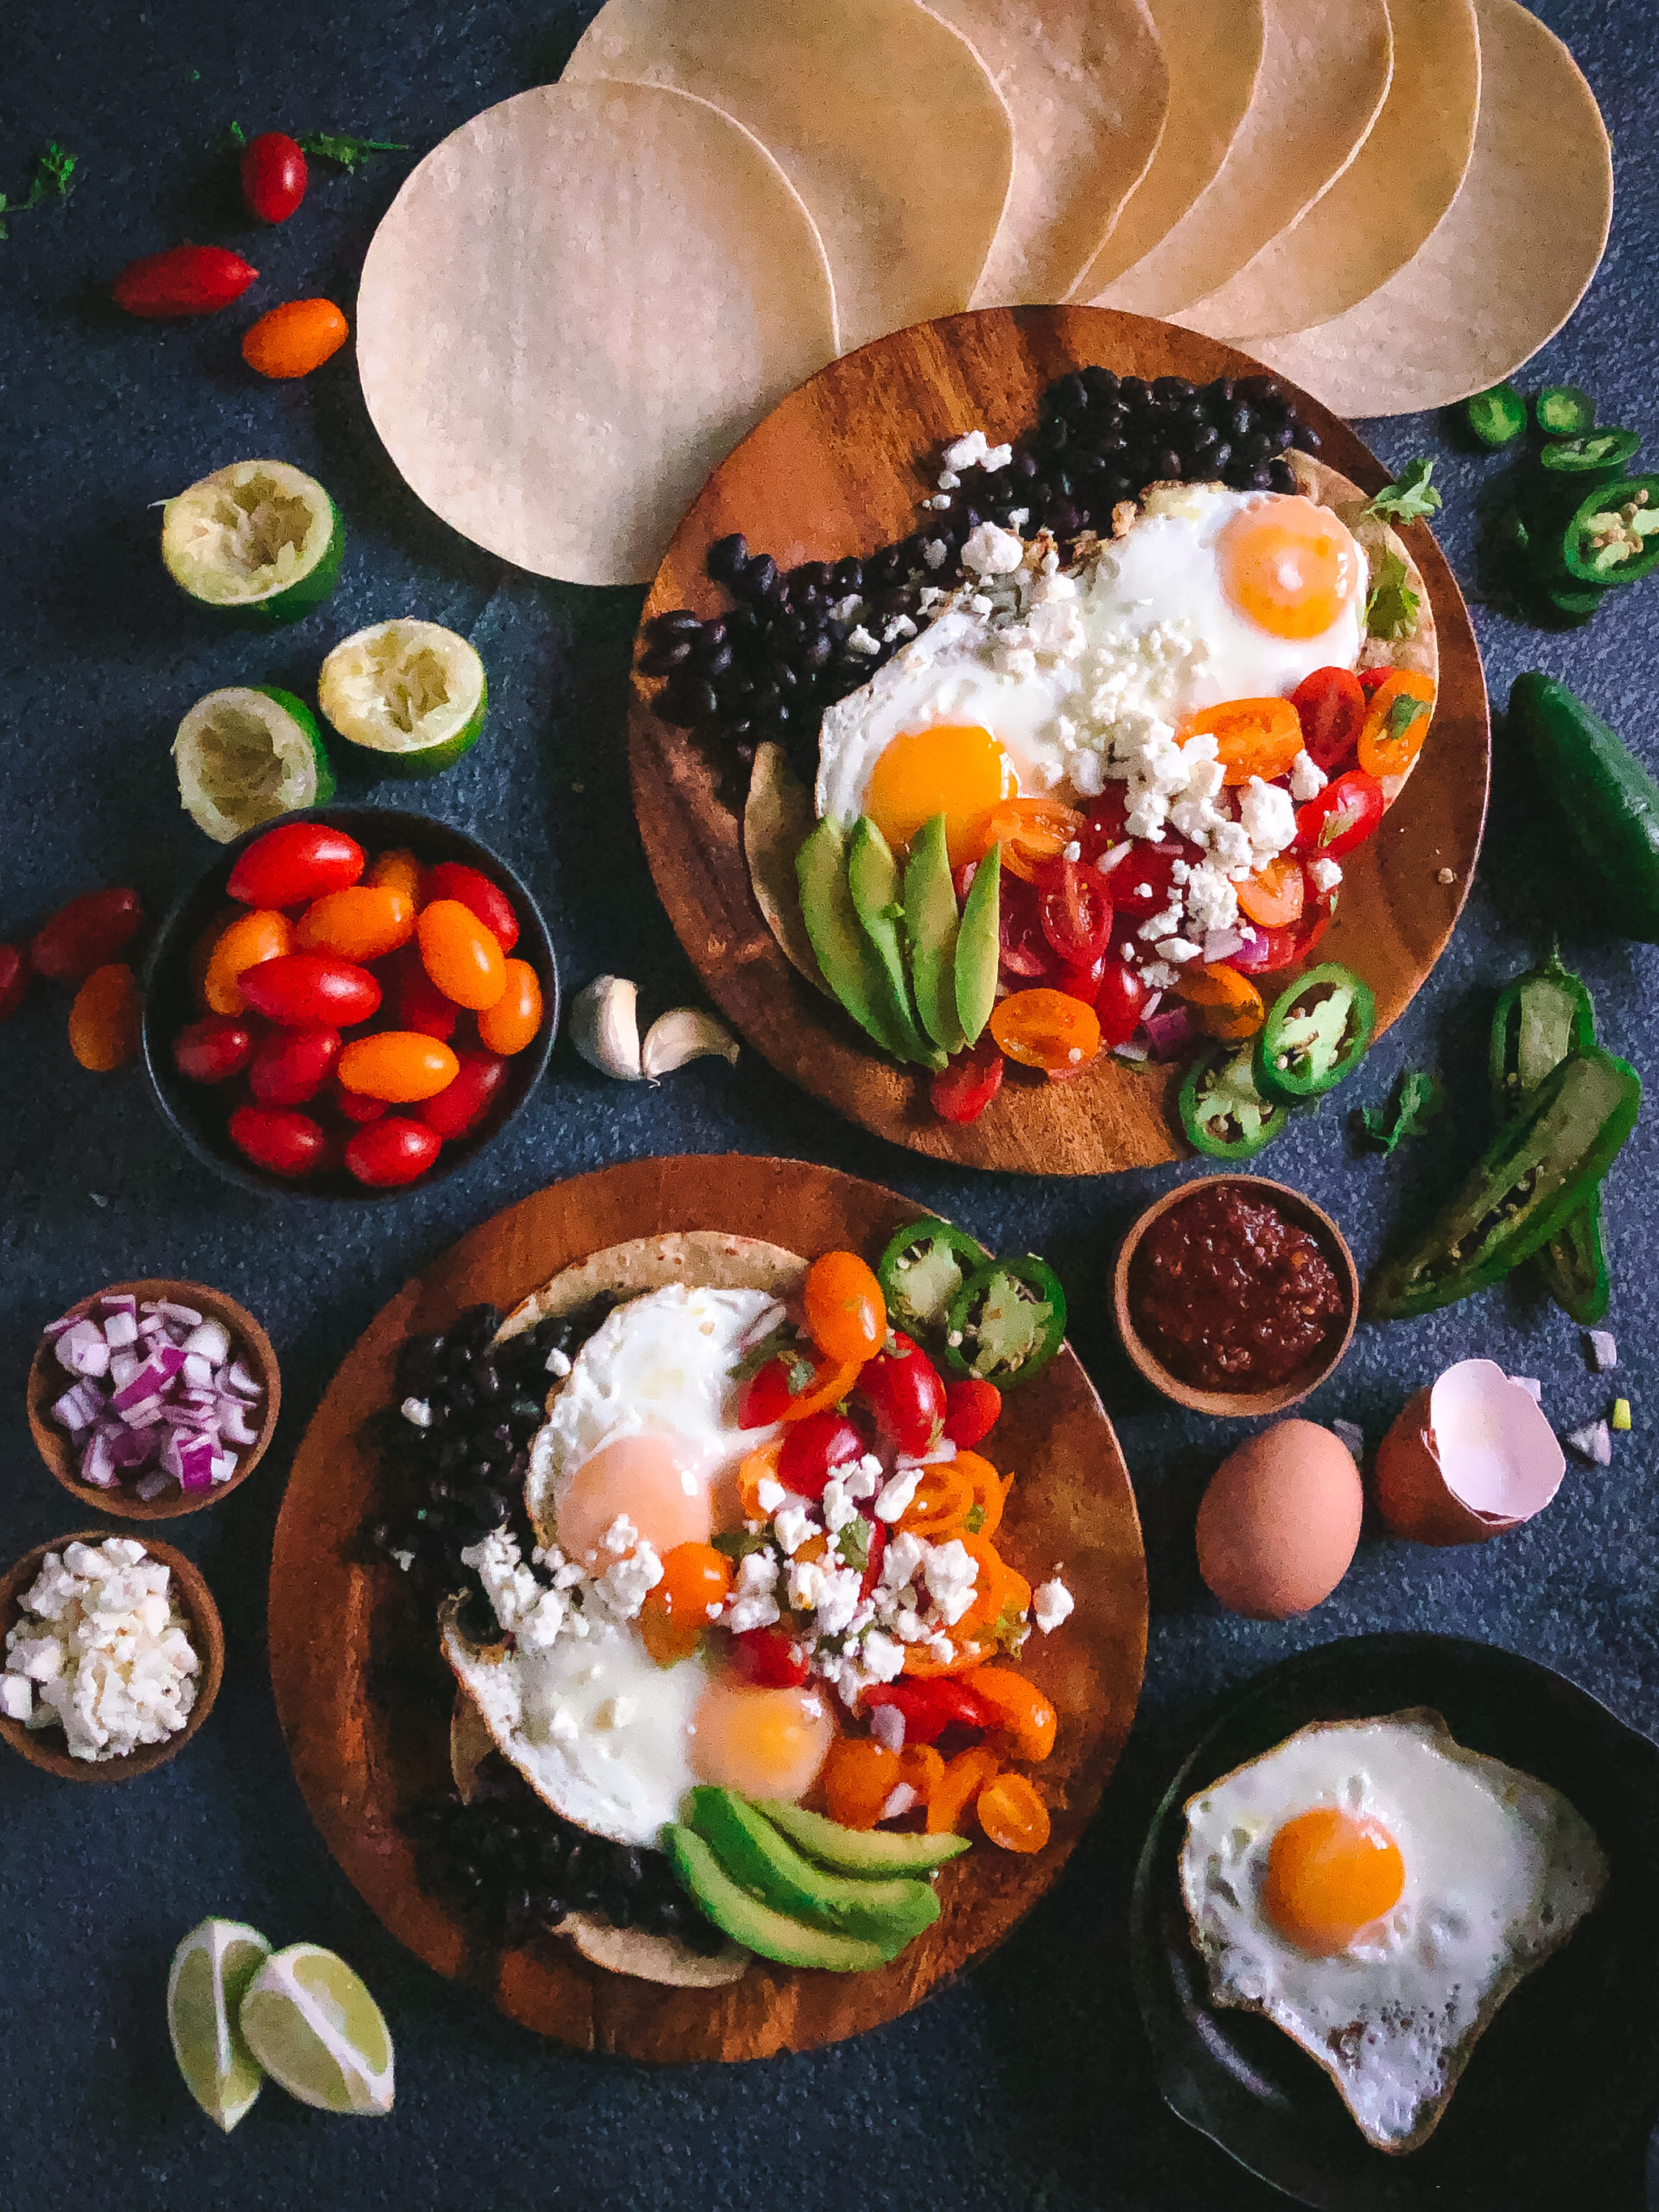 Huevos Rancheros made of sunny side up eggs, black beans, pico de gallo, cilantro a, and avocado on a wooden plate surrounded by cherry tomatoes and corn tortillas